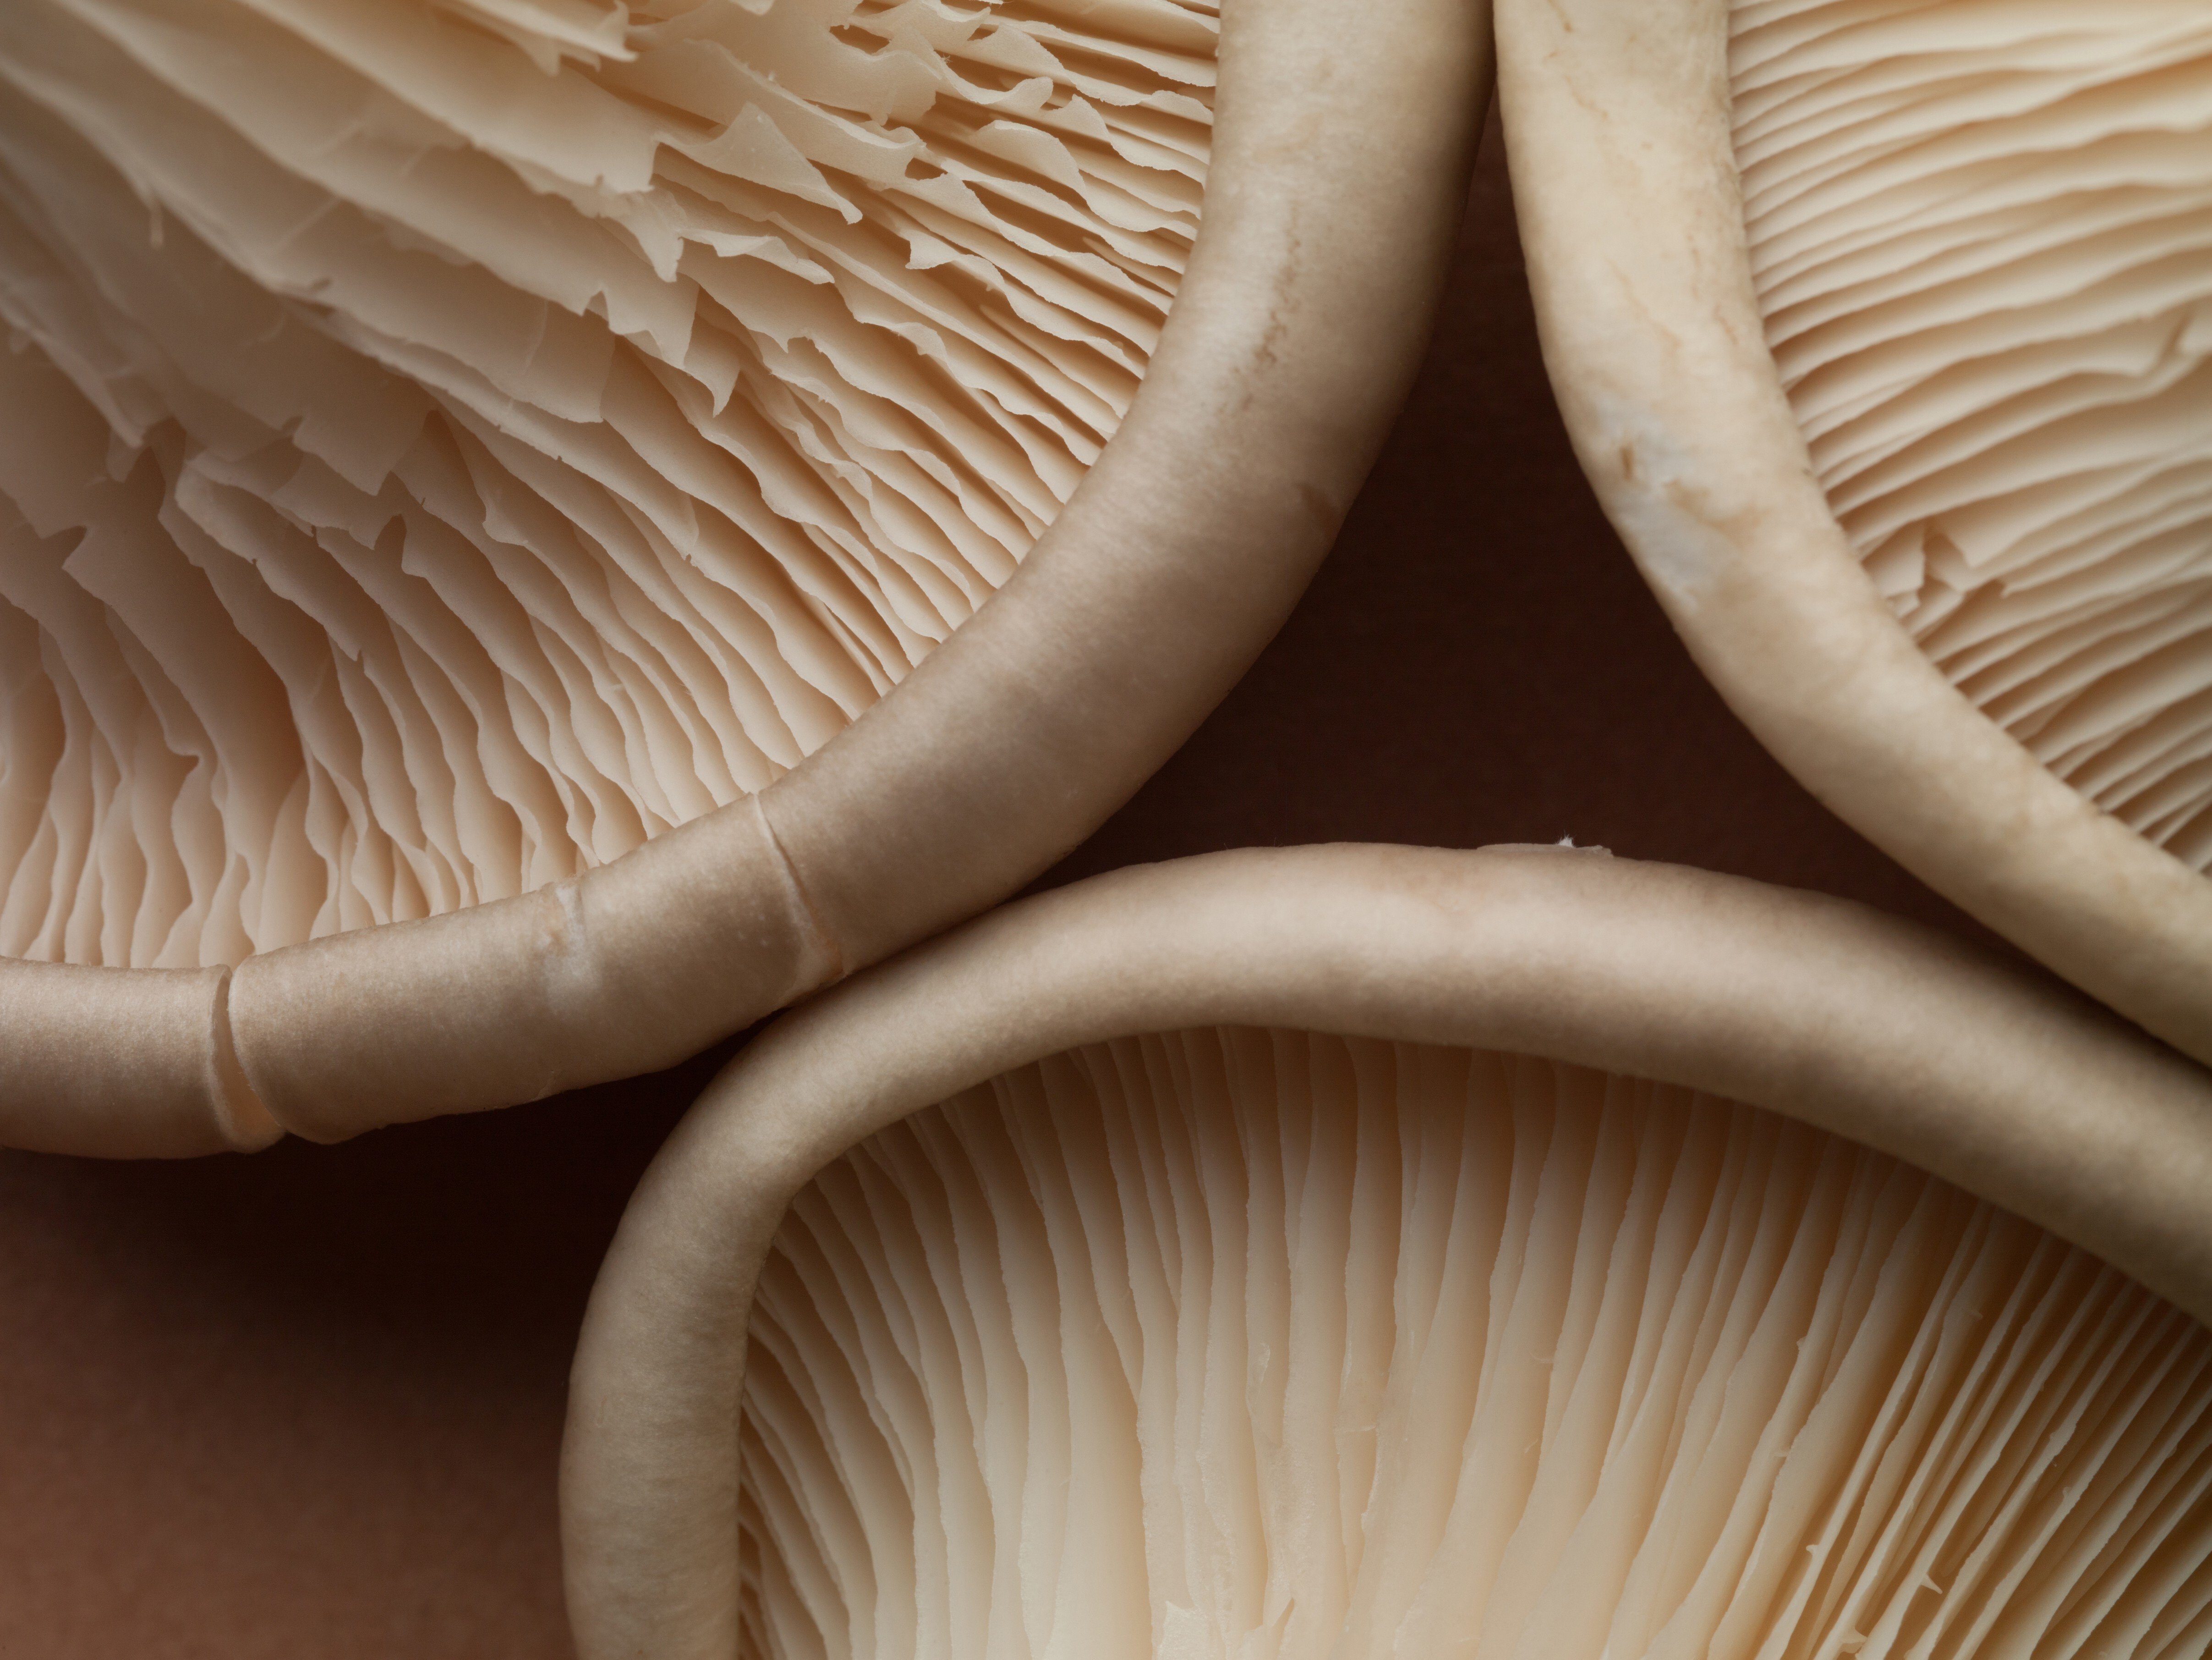 You can lower your cancer risk by nearly half by eating two medium-sized mushrooms a day, according to research that looked at studies over the past half-century. Photo: Getty Images